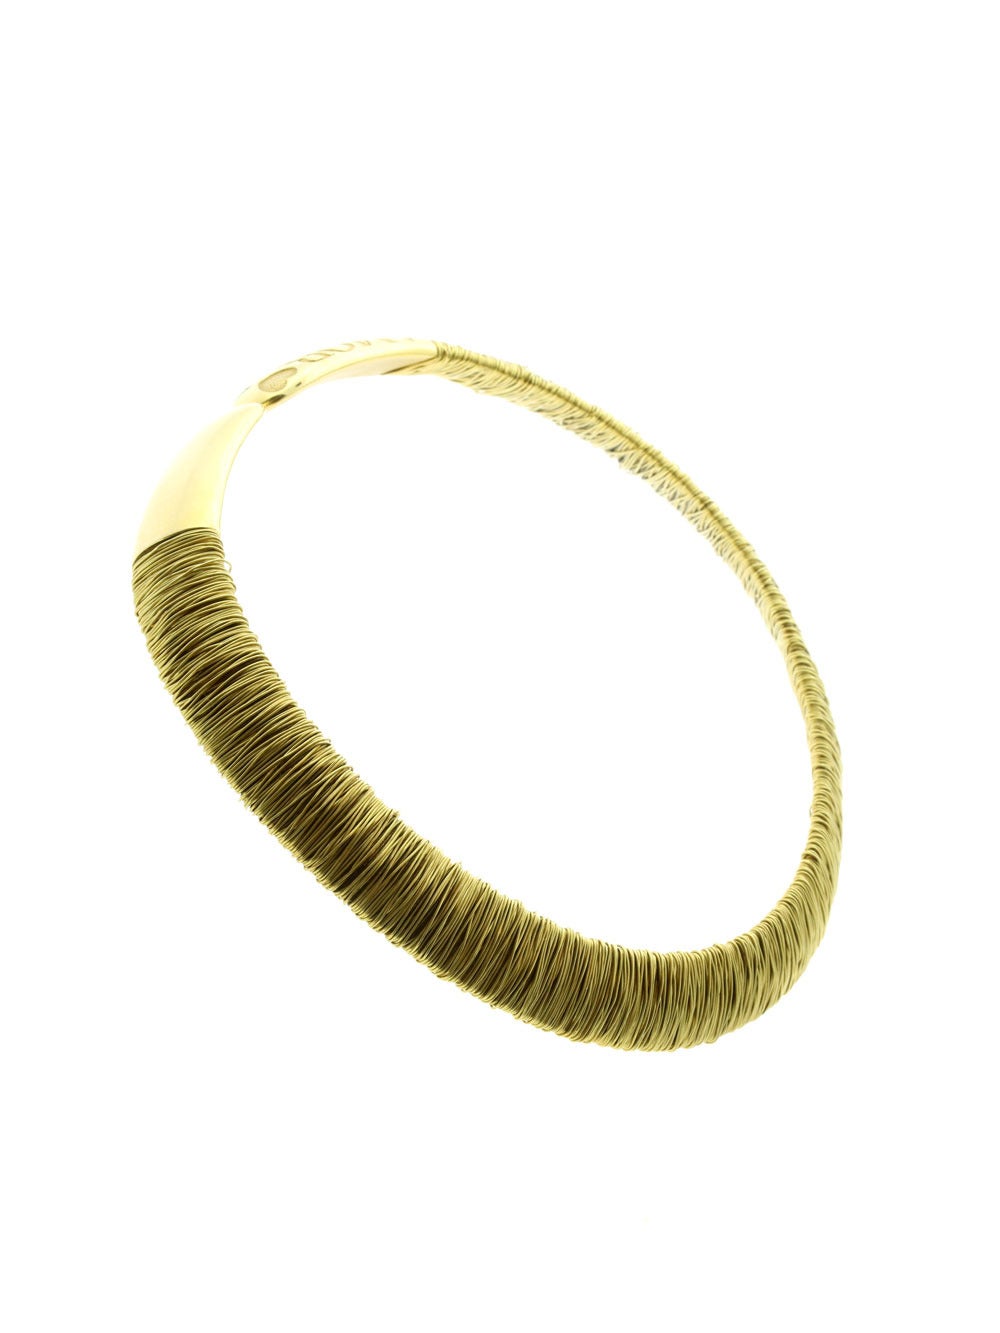 A magnificent Pasquale Bruni choker crafted in 18k yellow gold featuring a flawless marriage of classic design and modern elements.

Weight: 117.5 Grams
Measurements: The necklace measures .59″ inches wide
Necklace Length: 15.5″

Inventory ID: